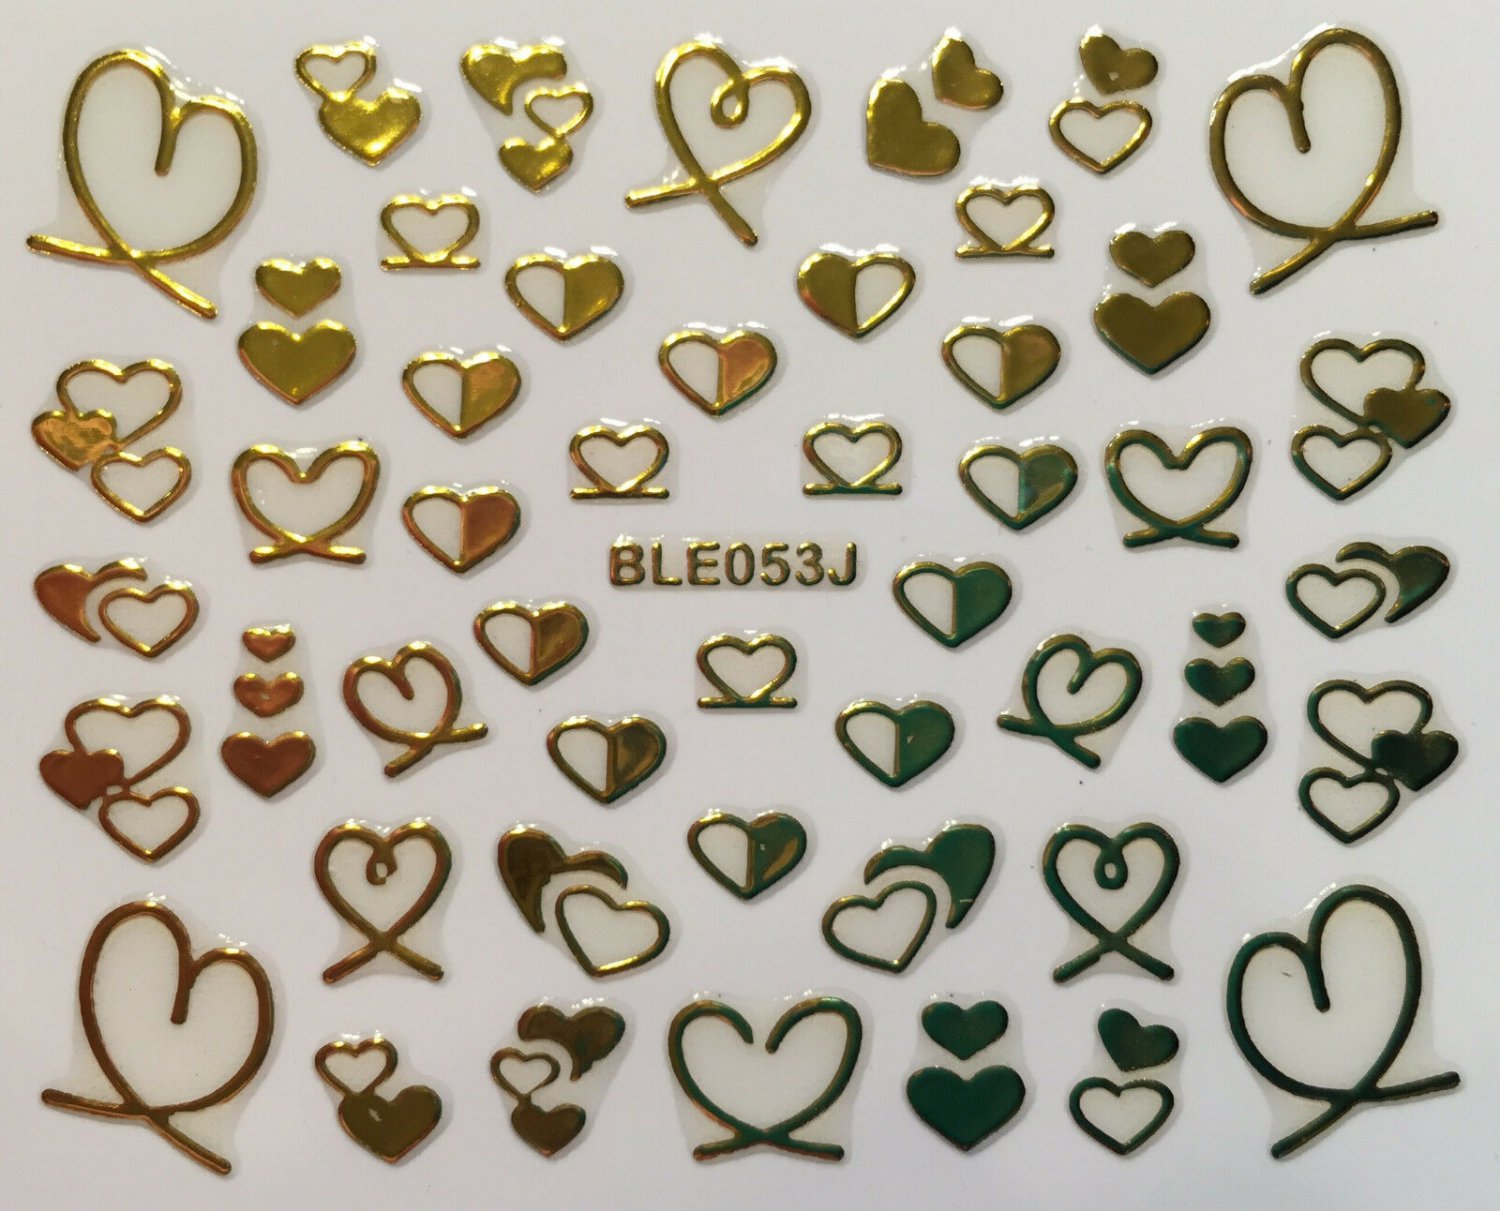 TM Nail Art 3D Decal Stickers Gold or Silver Hearts Valentine's Day BLE053J GOLD